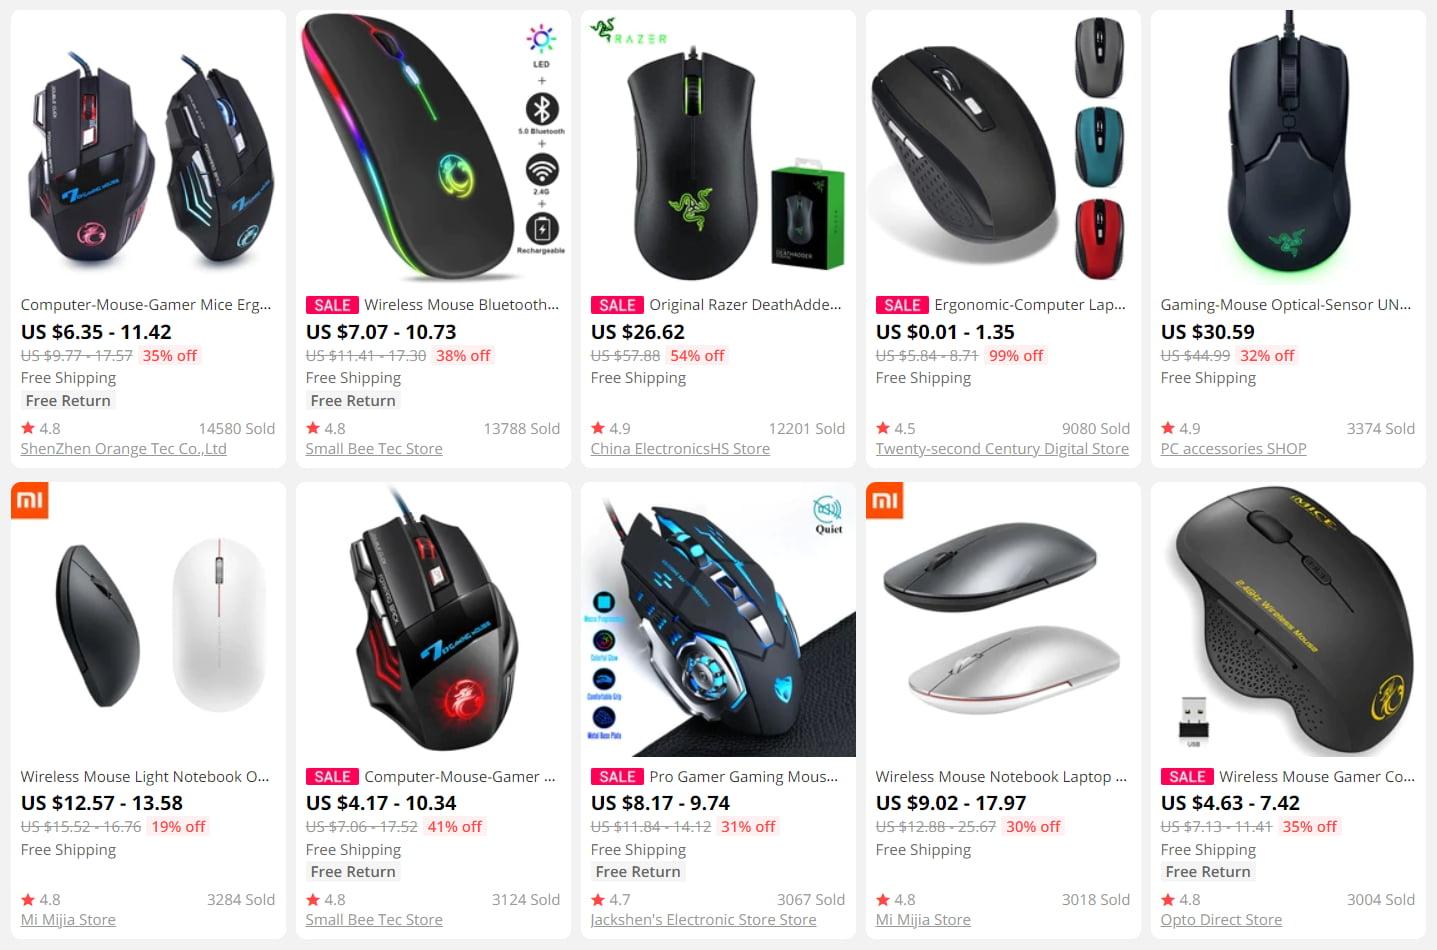 Gaming mice are a must for those who want to dropship video games gear